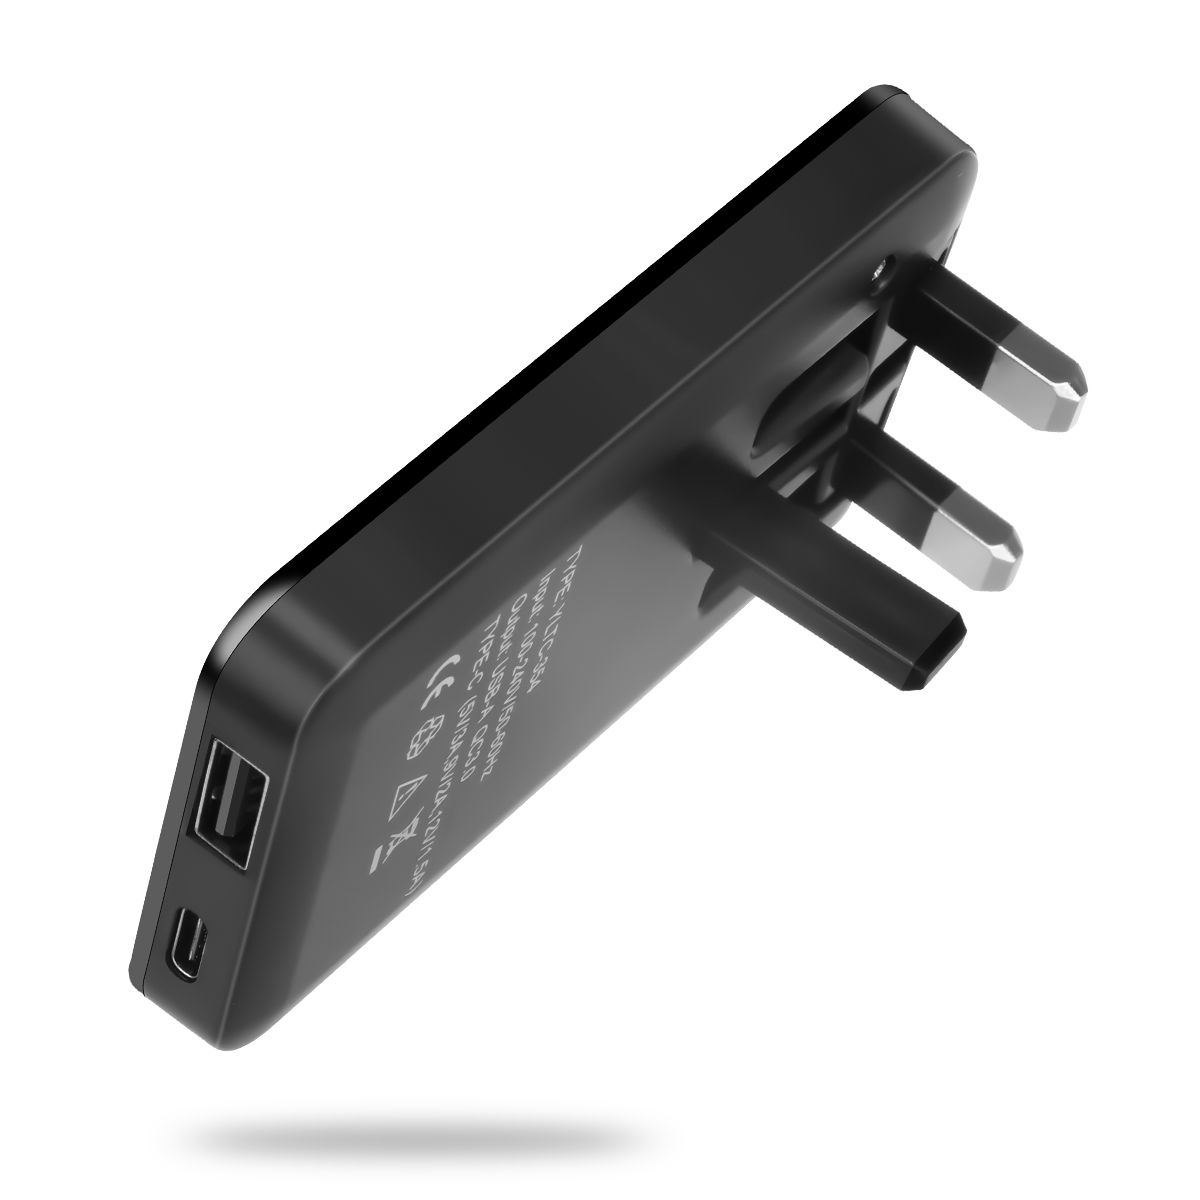 Merlin Wall Charger with Foldable Plug, Black - YLTC-354